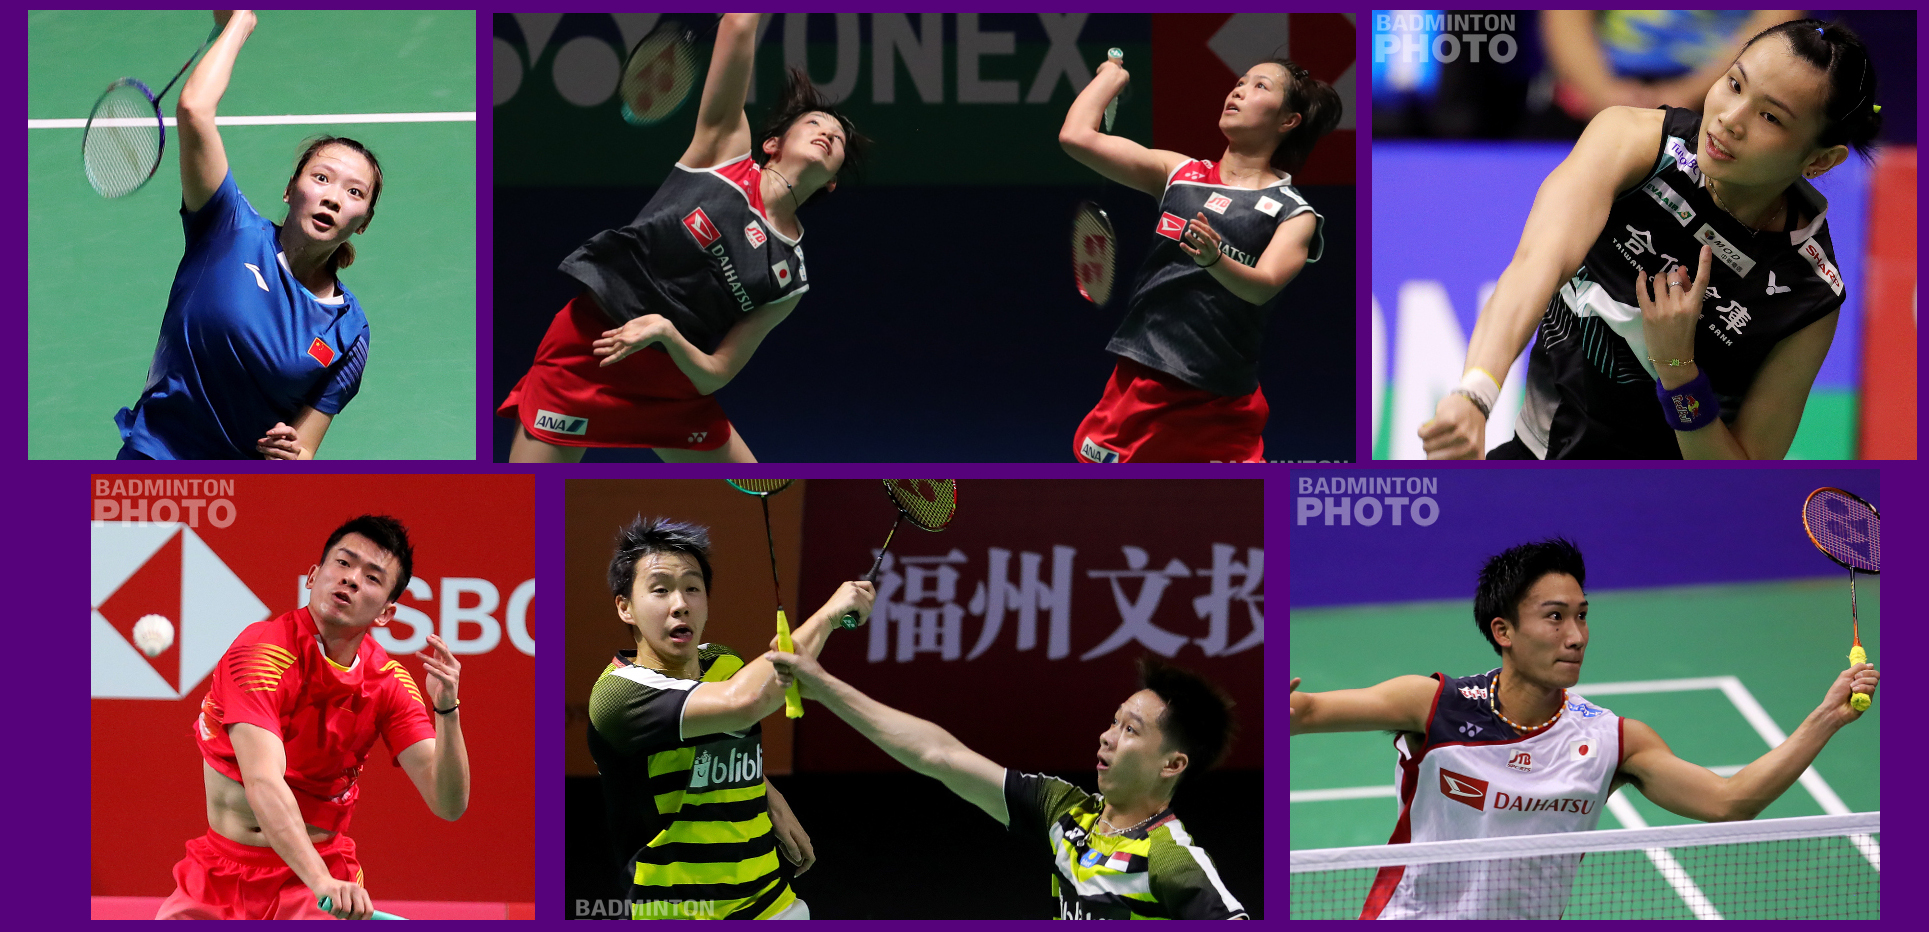 The BWF made the obvious choices for 2018 Player of the Year candidates, naming the big winners in all five categories, including mixed doubles World Champions Huang Yaqiong and Zheng […]